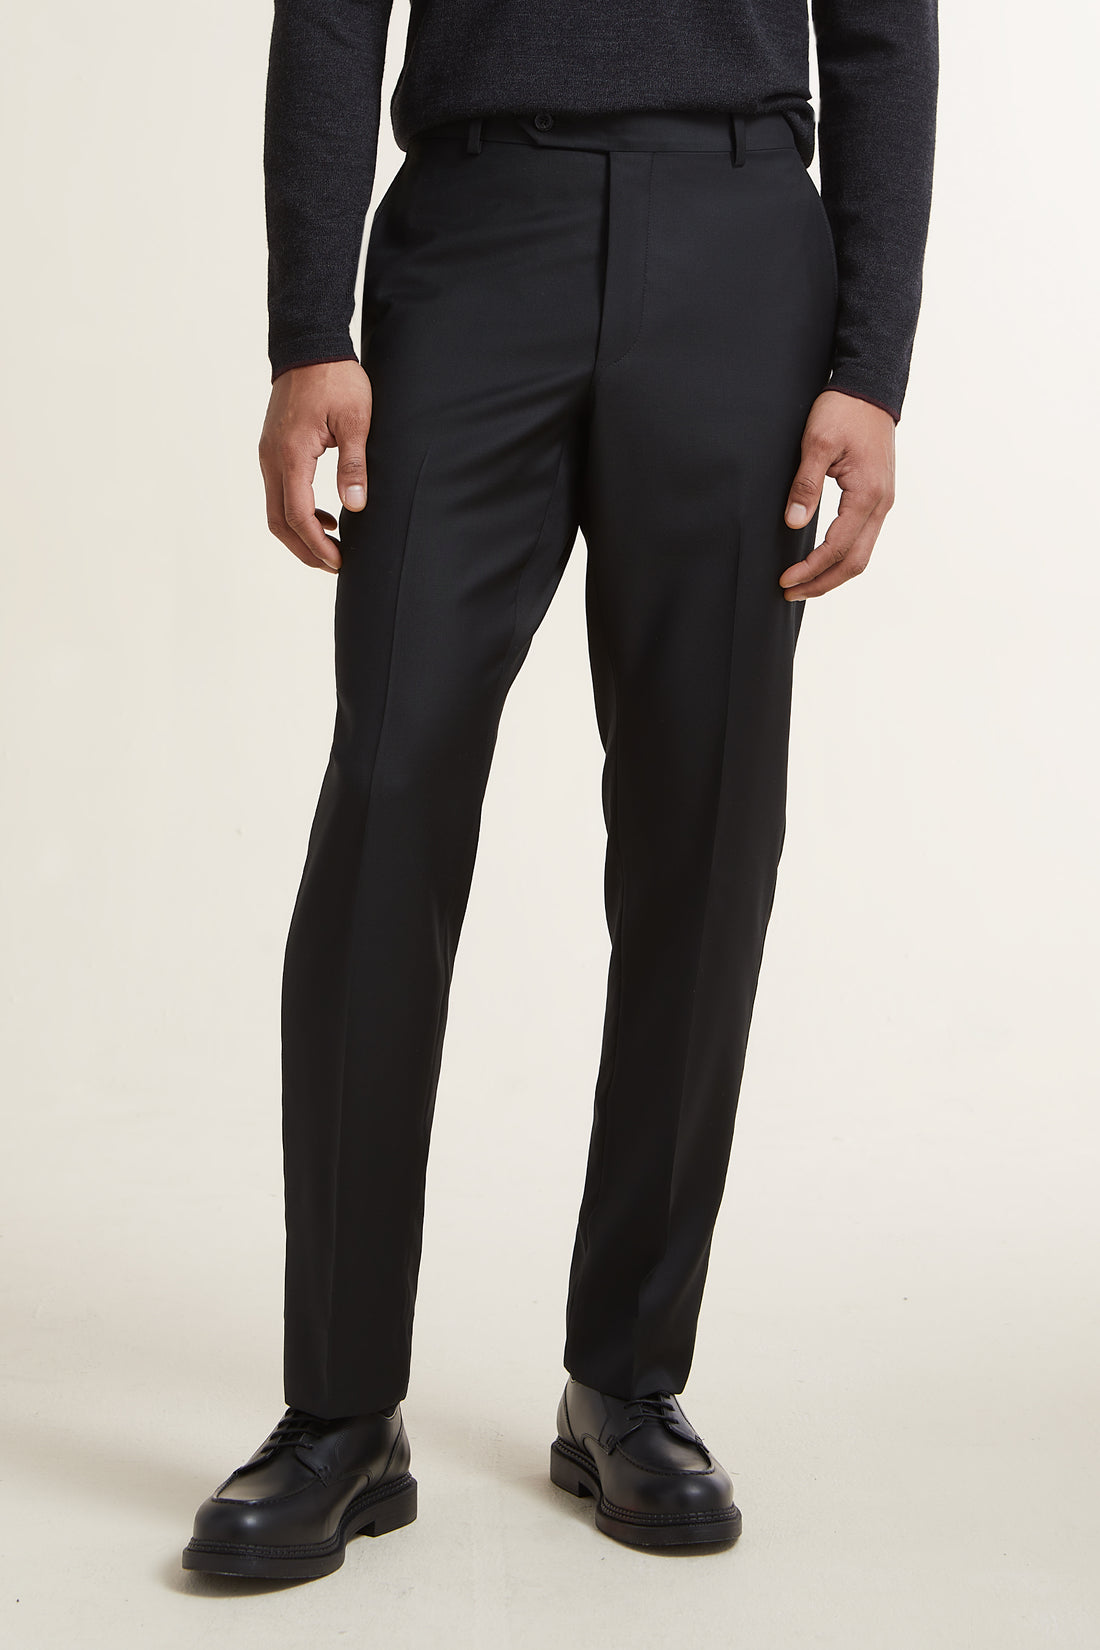 Black Flat Front Trousers